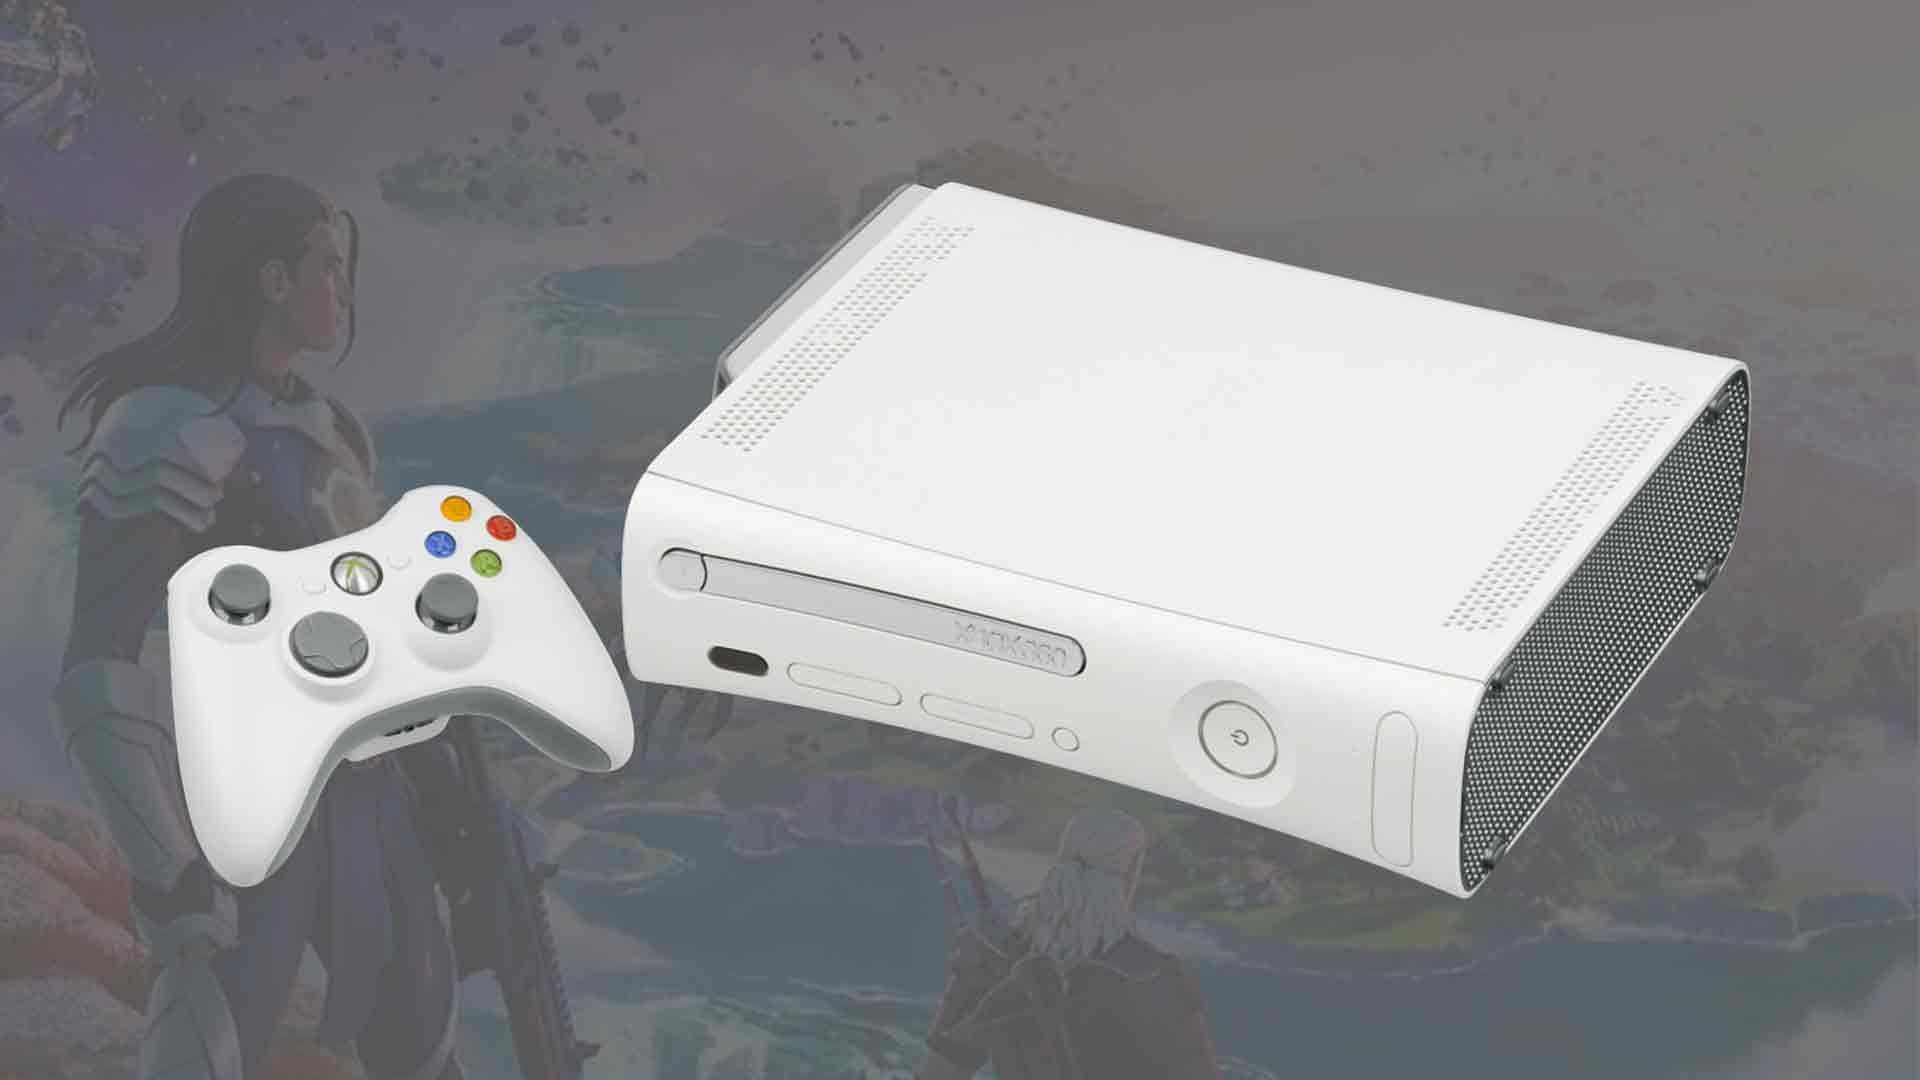 You Can Get Fortnite on Xbox 360! 